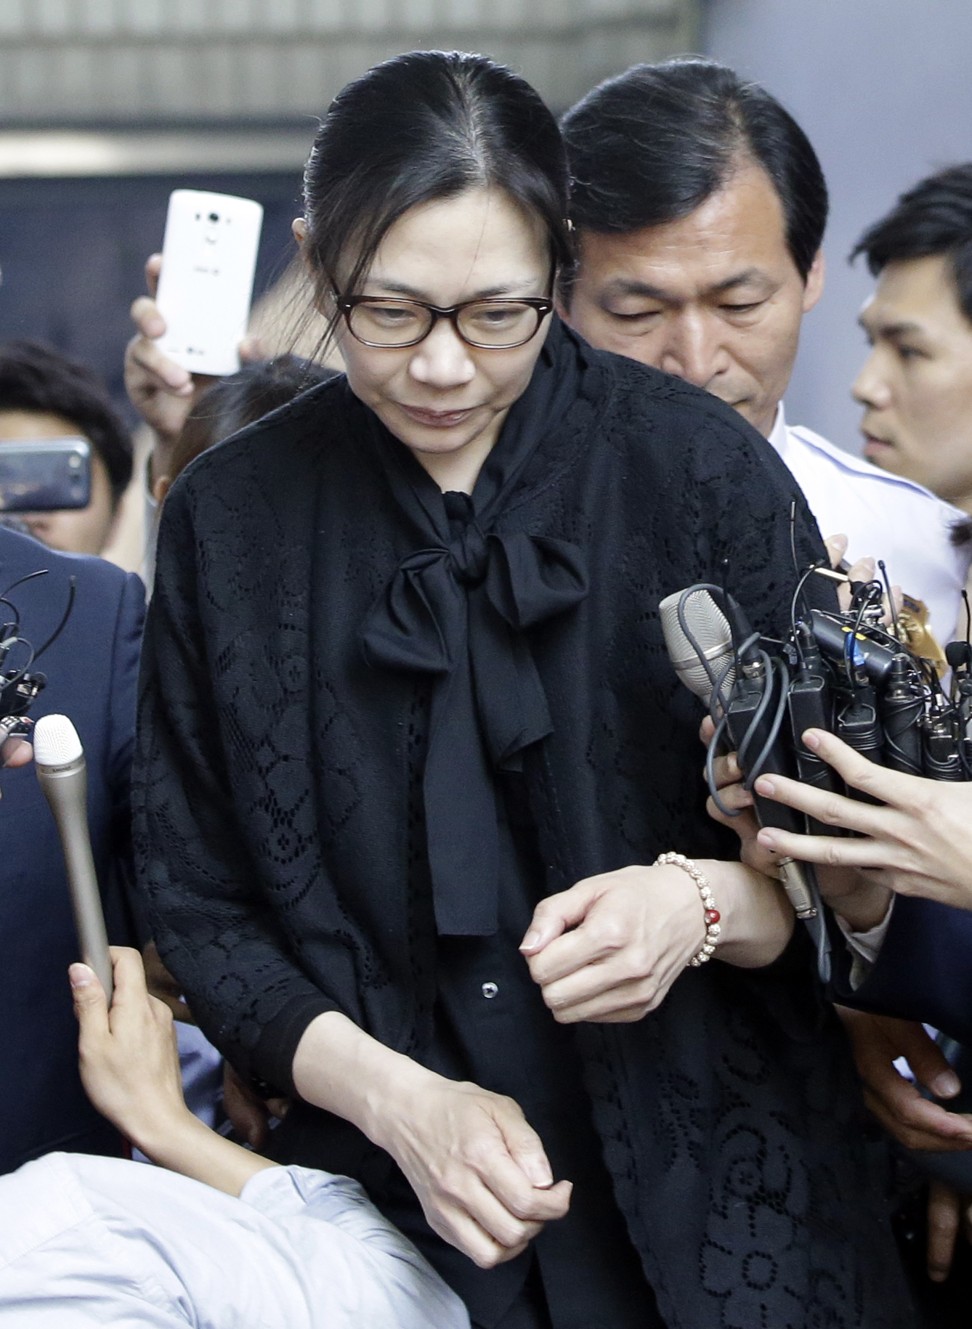 Elder sister Cho Hyun-ah, or Heather Cho, made headlines over a notorious ‘nut rage’ incident in 2014, when she lost her temper over the way she was served macadamia nuts in first class. File photo: Reuters